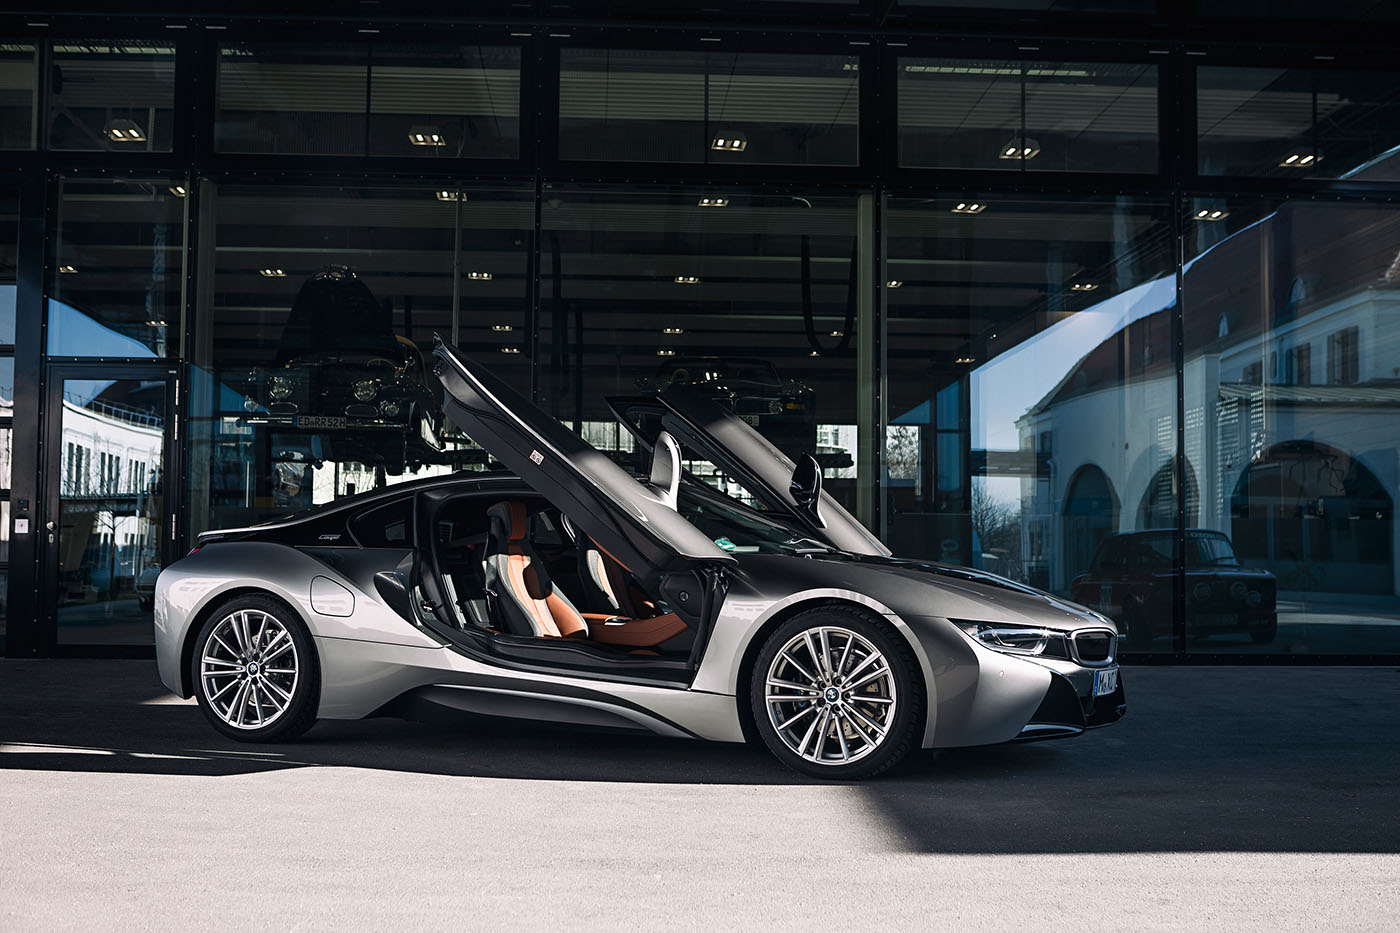 bmw-i8-from-vision_1_copy.jpg